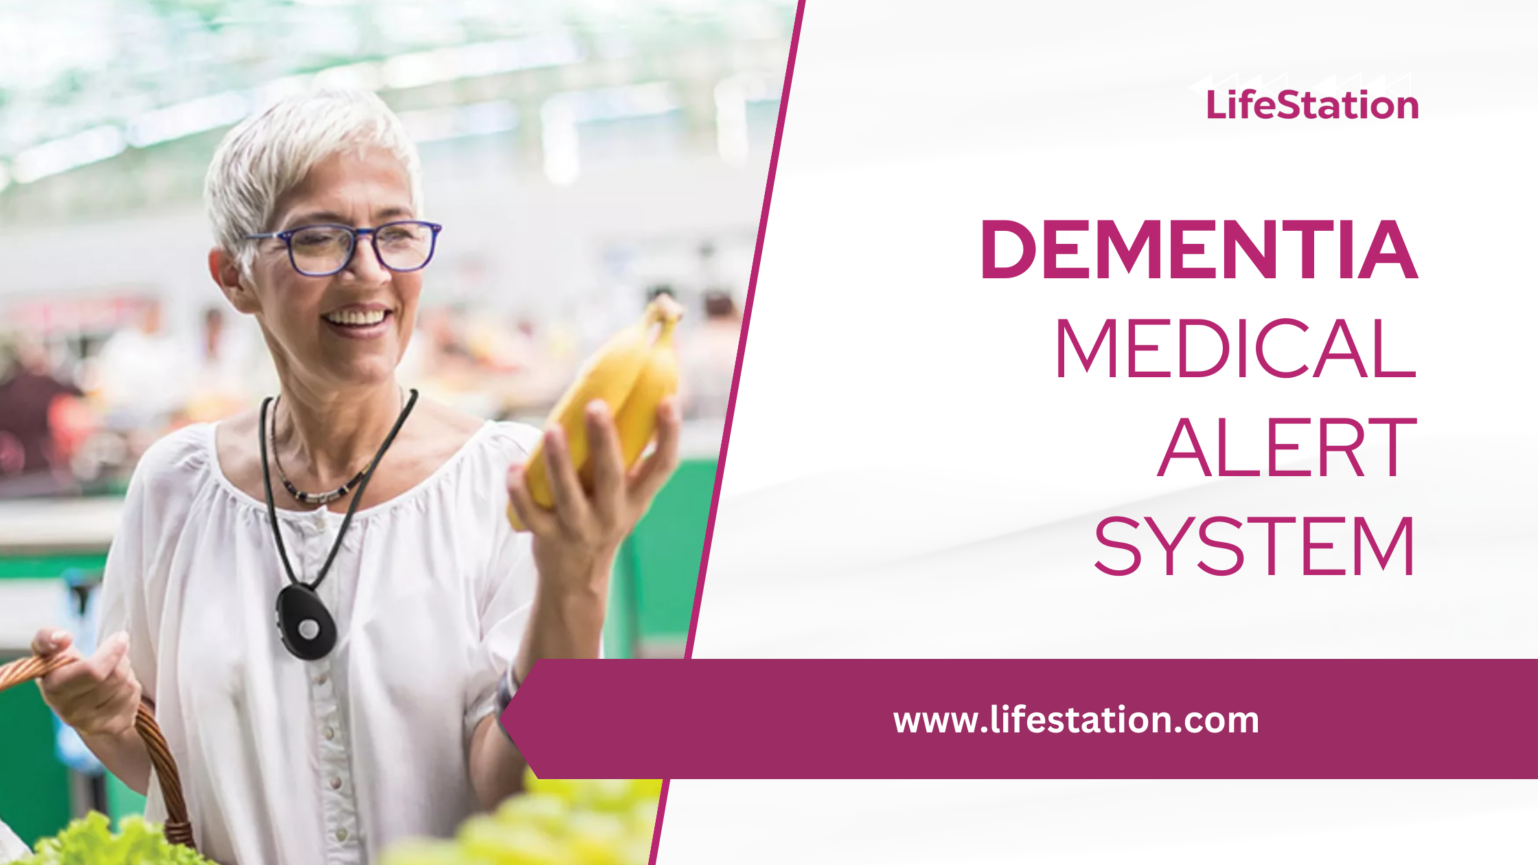 Older woman with glasses smiles at a banana, wearing a medical alert pendant. Text: 'DEMENTIA MEDICAL ALERT SYSTEM' at LifeStation